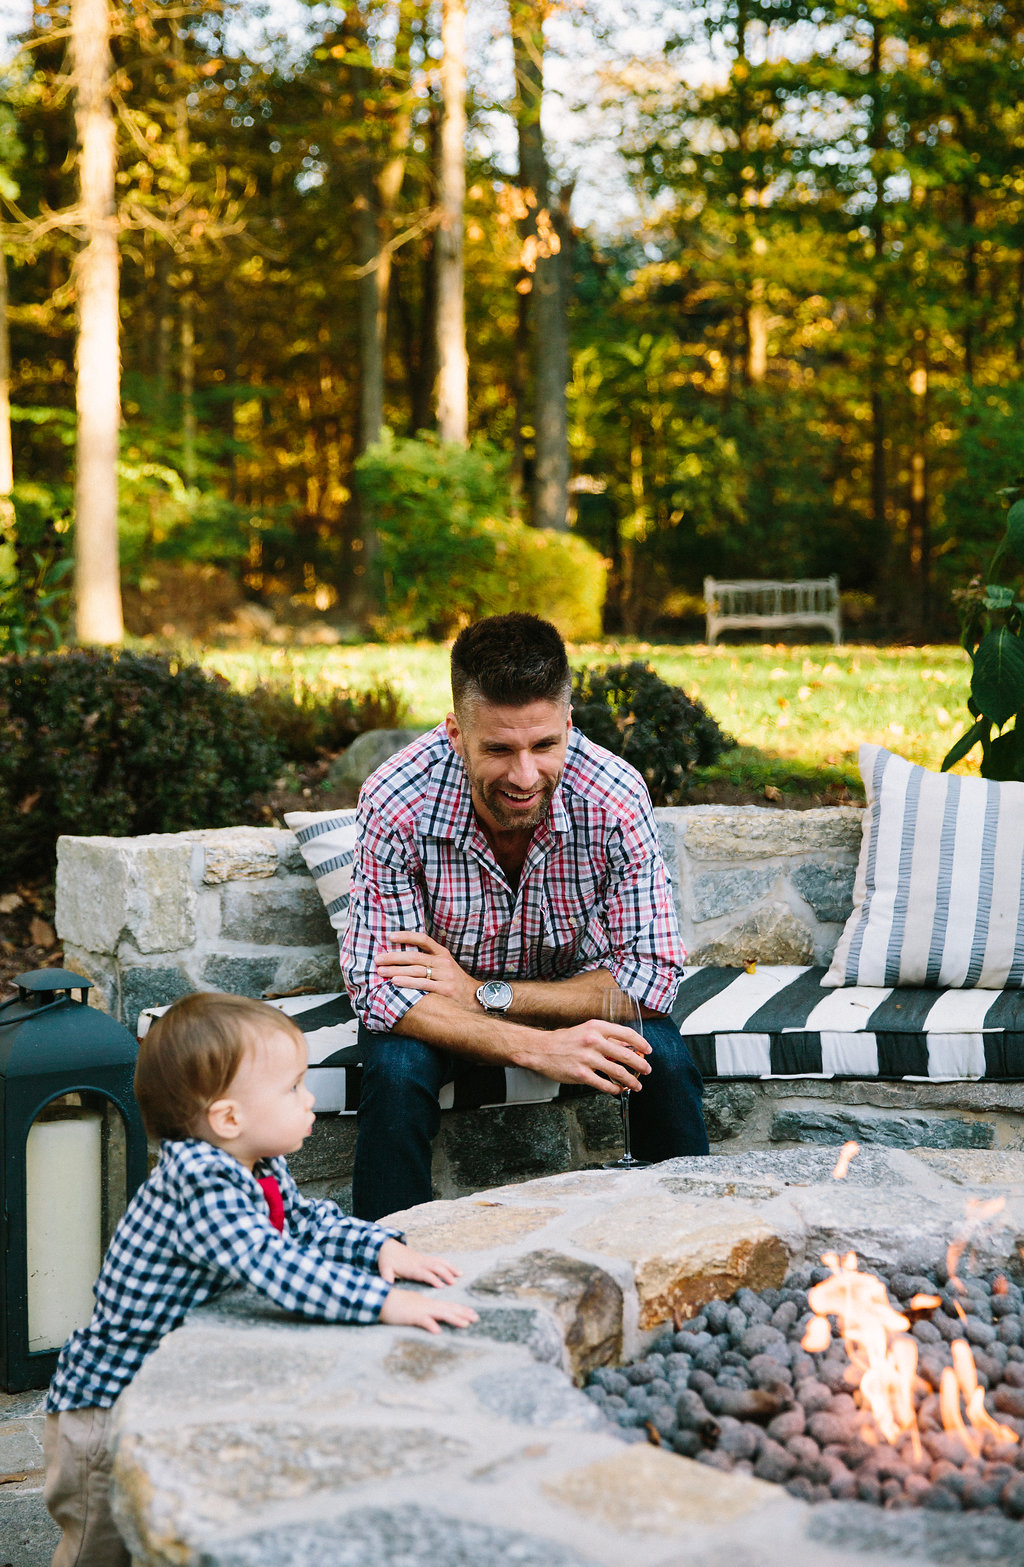 Kyle and Major Martino sit out by the fire pit at their connecticut home for Major's first birthday party